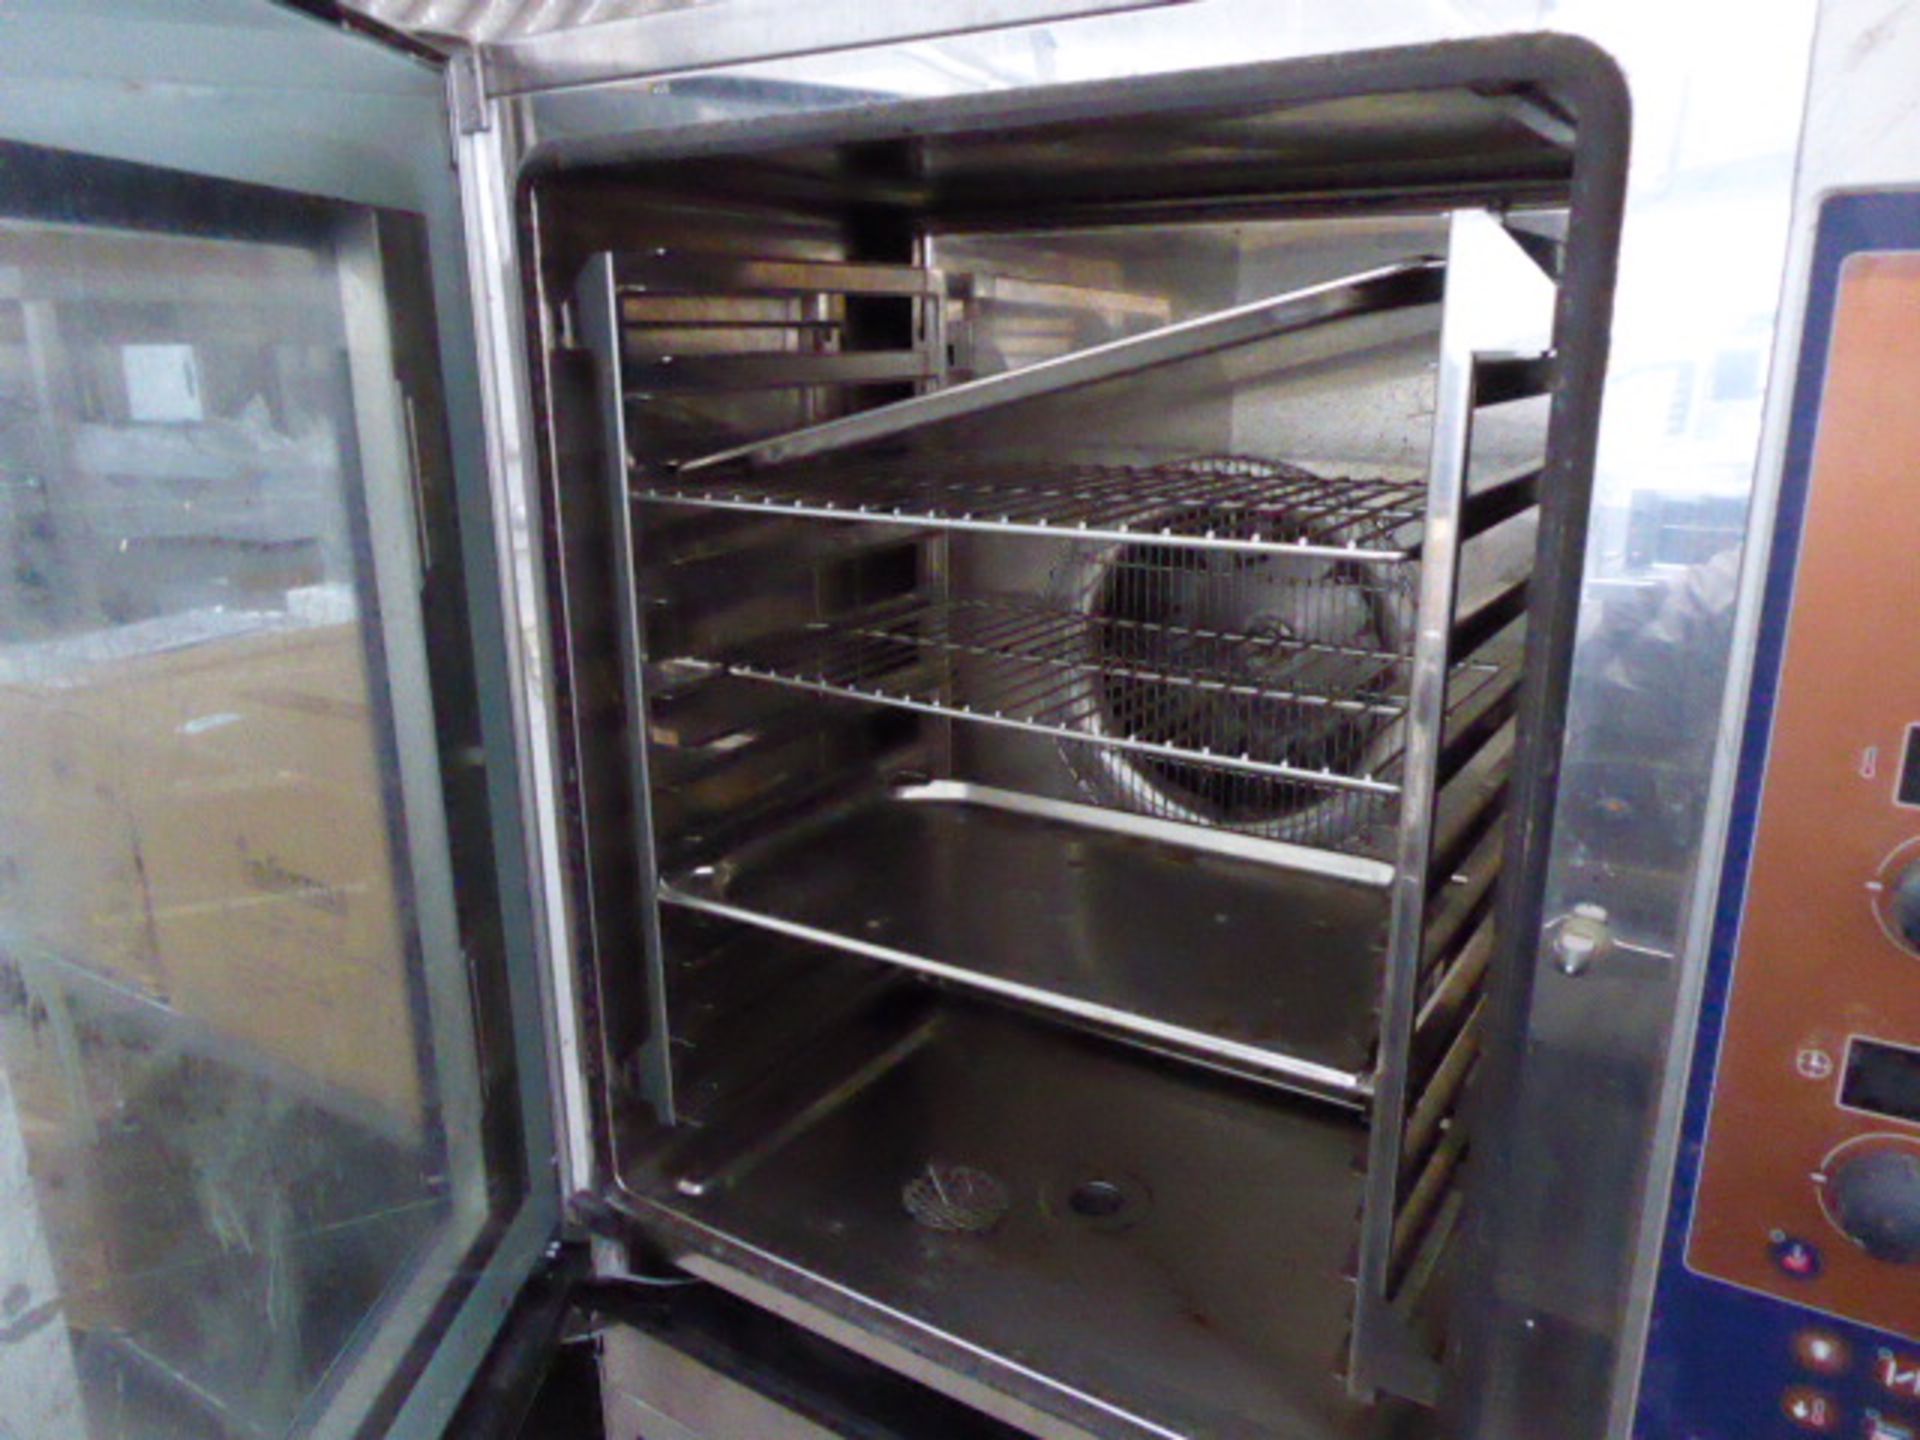 100cm Lainox type HMG101P 10 shelf combination oven on stand - Image 2 of 4